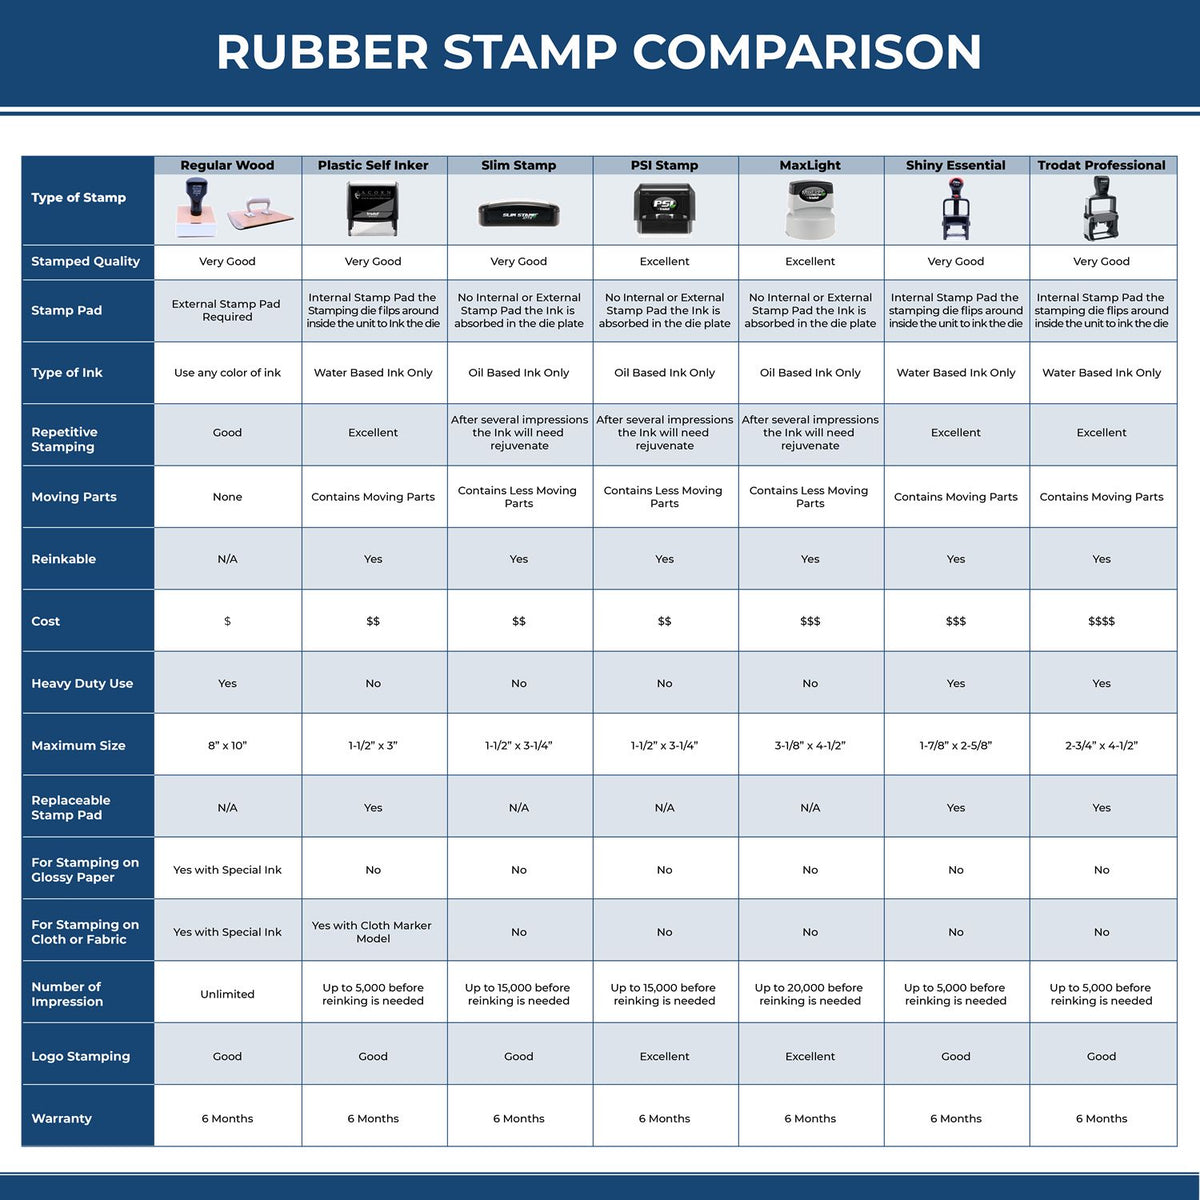 A comparison chart for the different types of mount models available for the PSI Mississippi Notary Stamp.